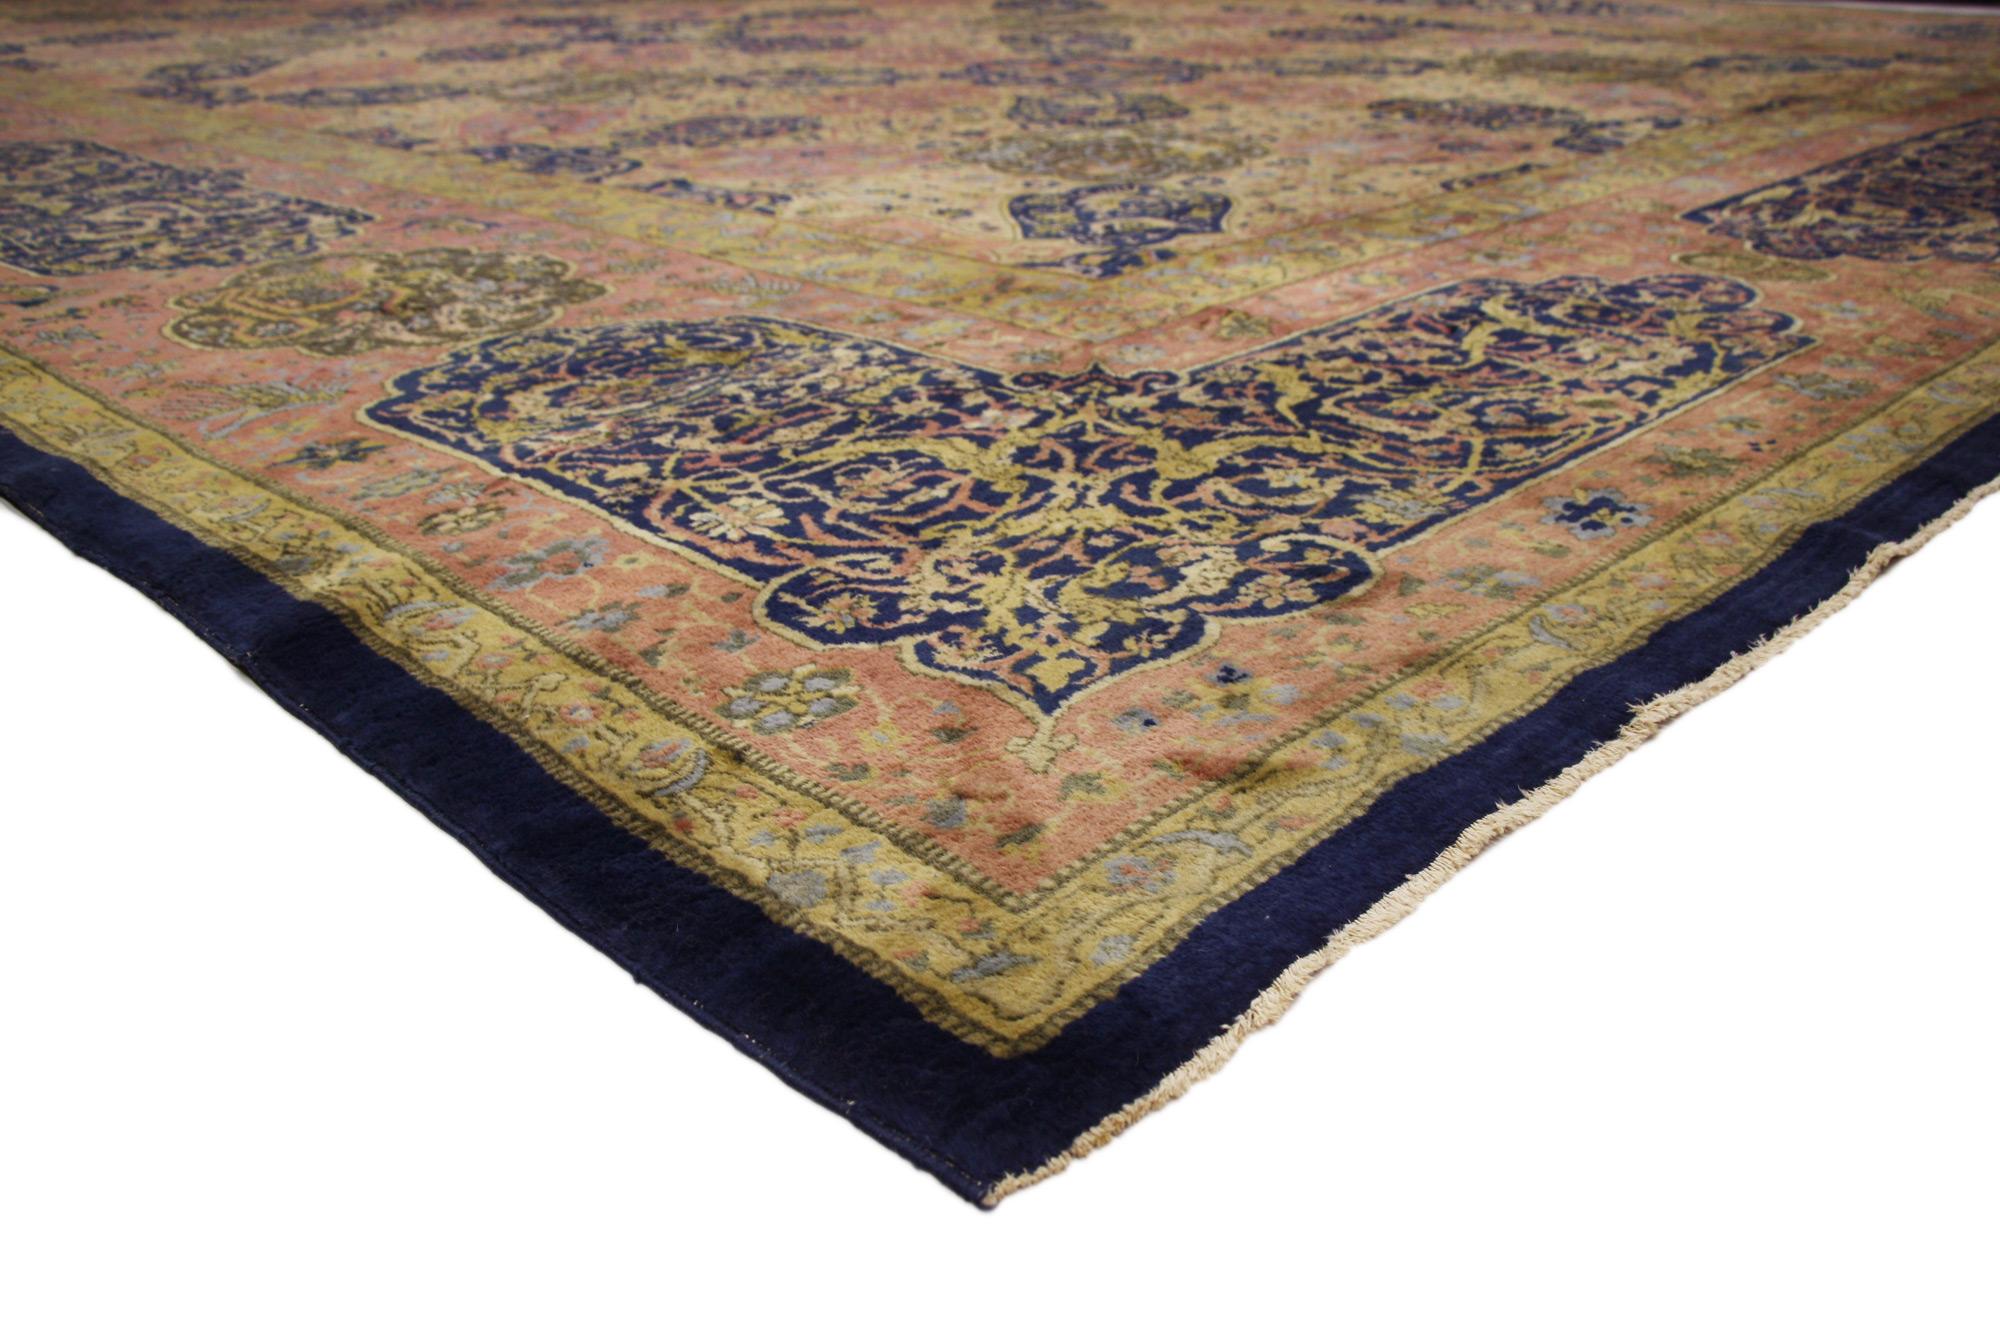 77150 Antique Indian Agra Rug 15'02 x 24'04. Reflecting Persian carpet elements from the 16th century, this hand-knotted wool antique Indian Agra rug is a captivating vision of woven beauty. The eye-catching Dragon and Phoenix design and refined